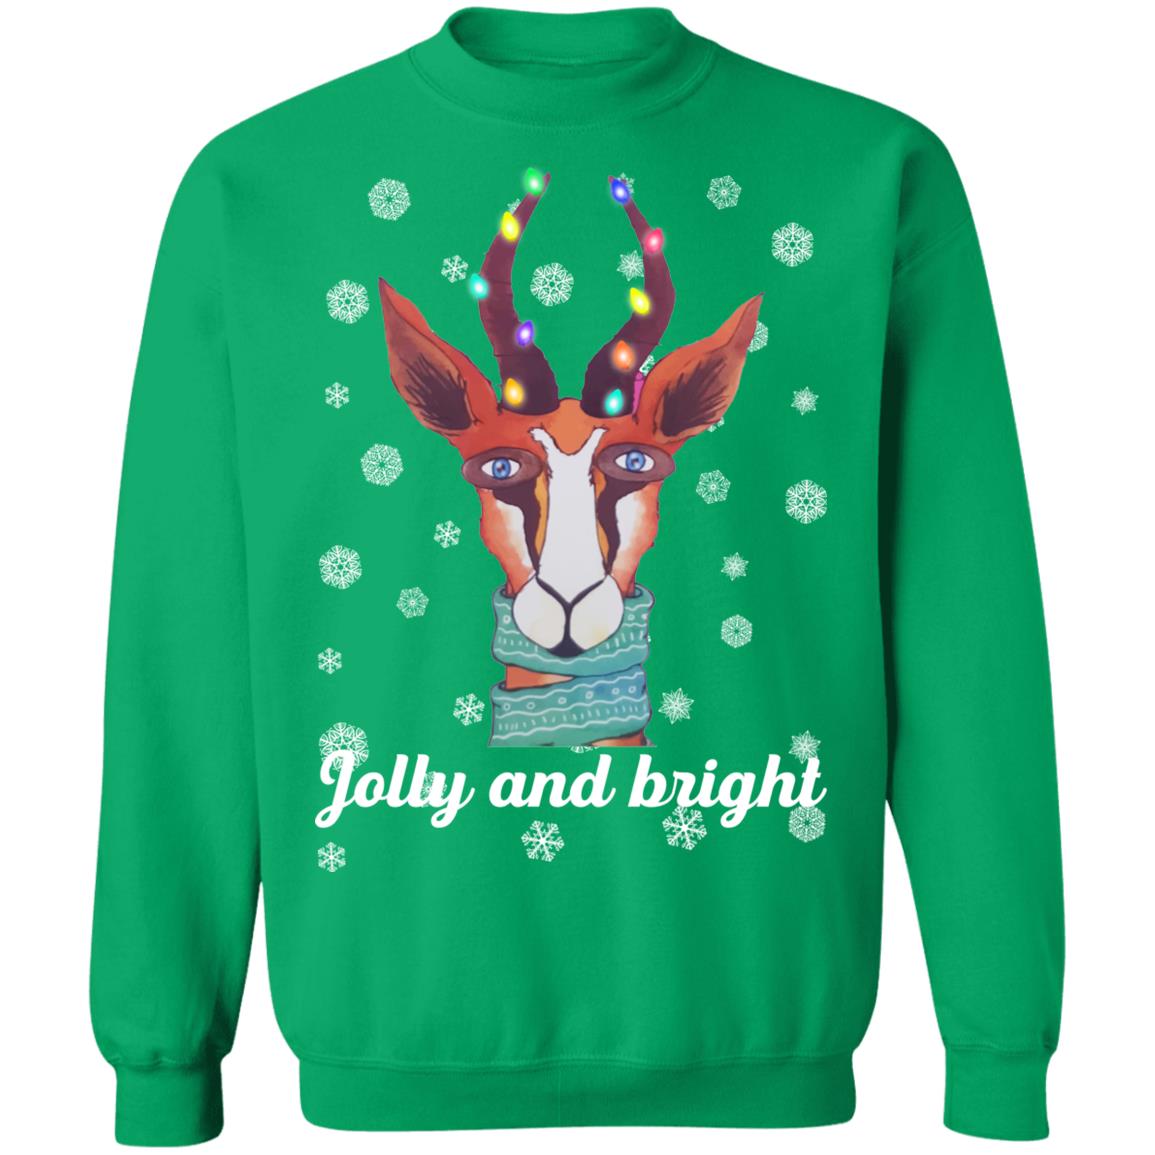 Illustrated Christmas Unique Colourful Jolly and Bright Sweatshirt ...